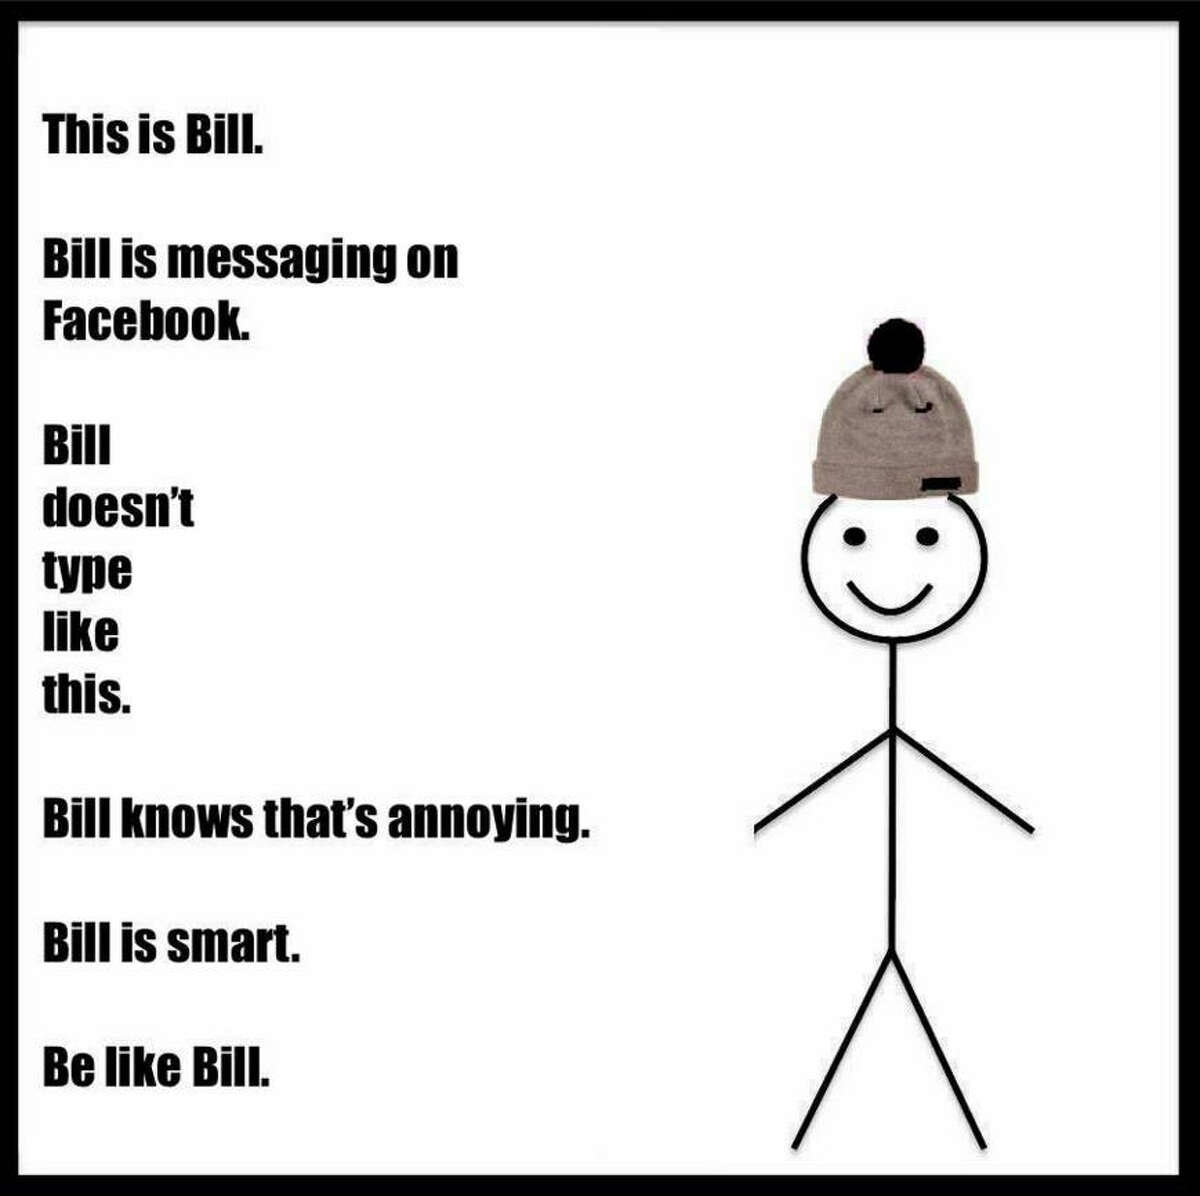 "Be like Bill" memes have gone viral to tell people what annoys them in the most passive aggressive way.